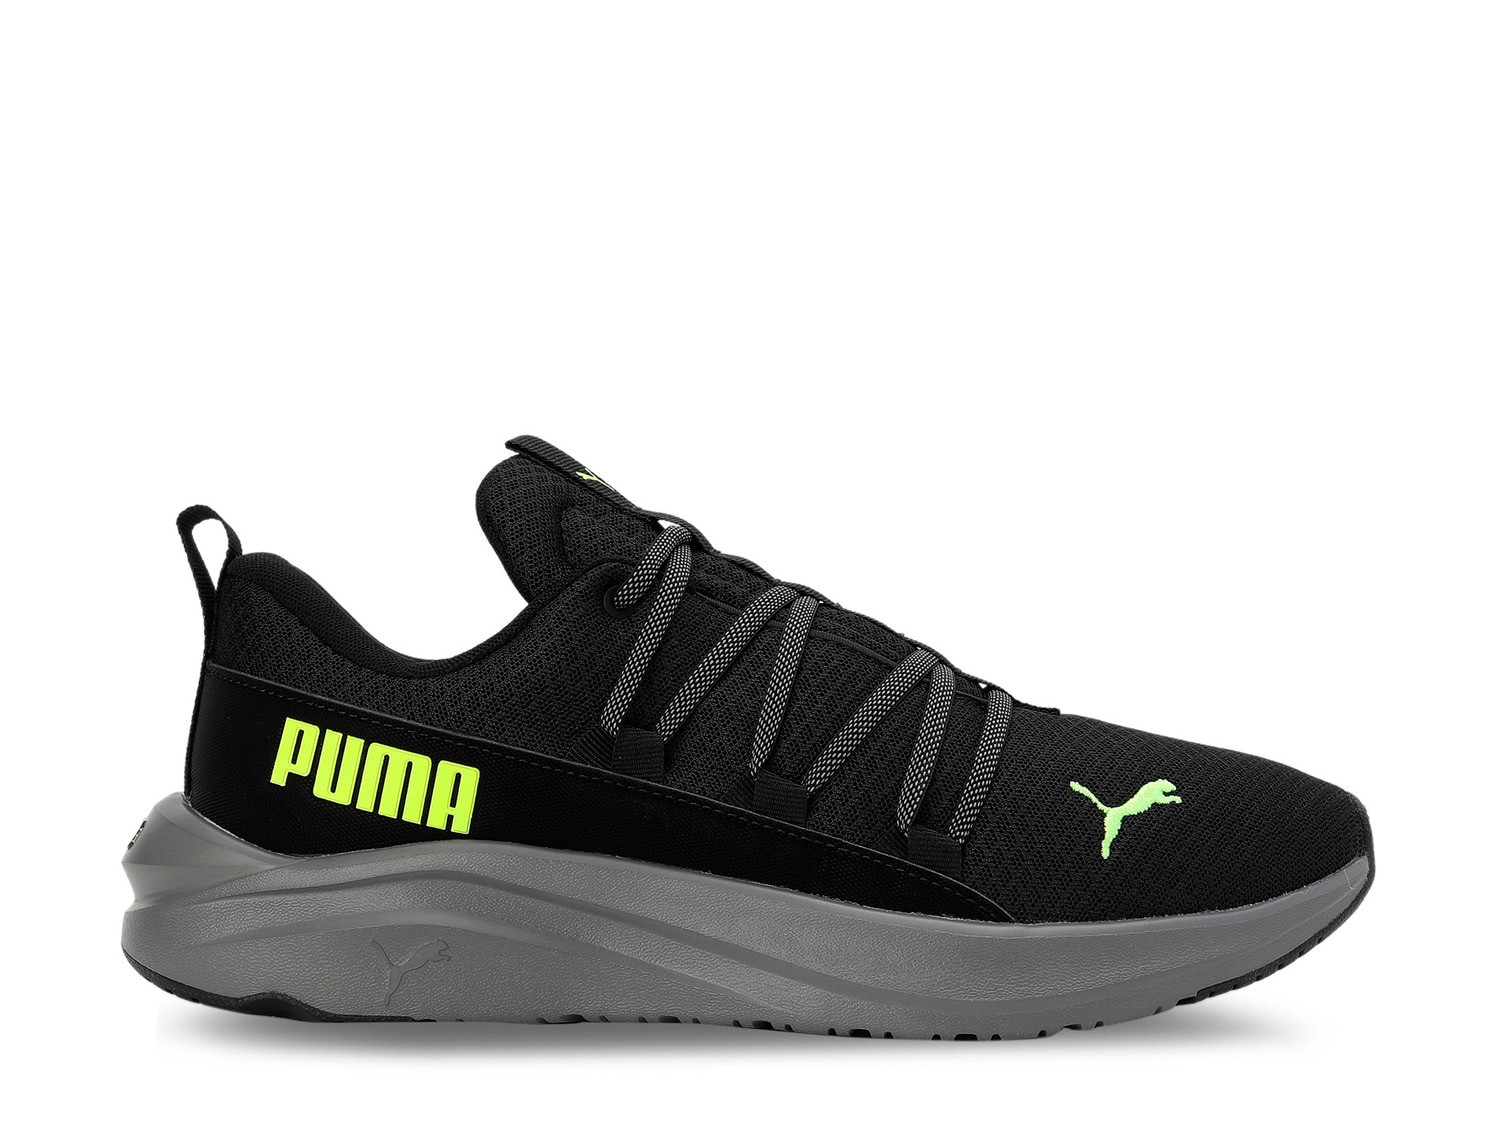 Puma Softride One4all Sneaker - Men's - Free Shipping | DSW